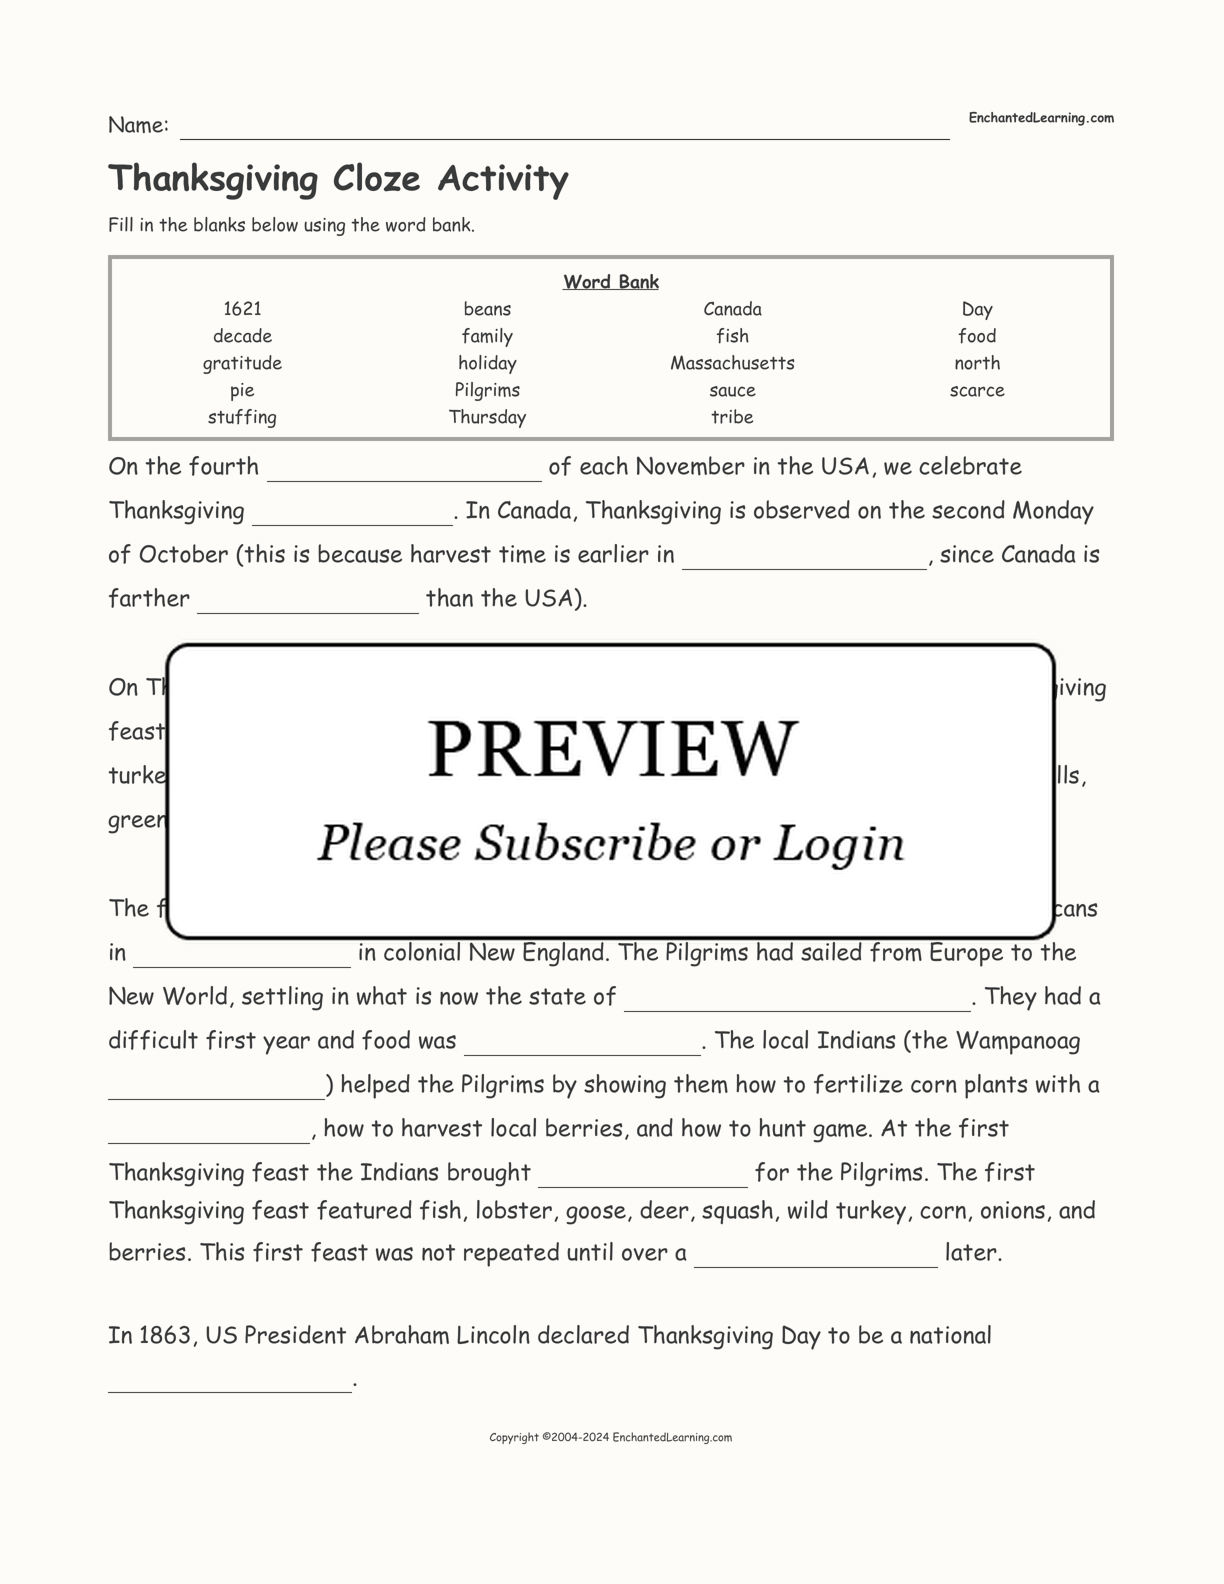 Thanksgiving Cloze Activity interactive worksheet page 1